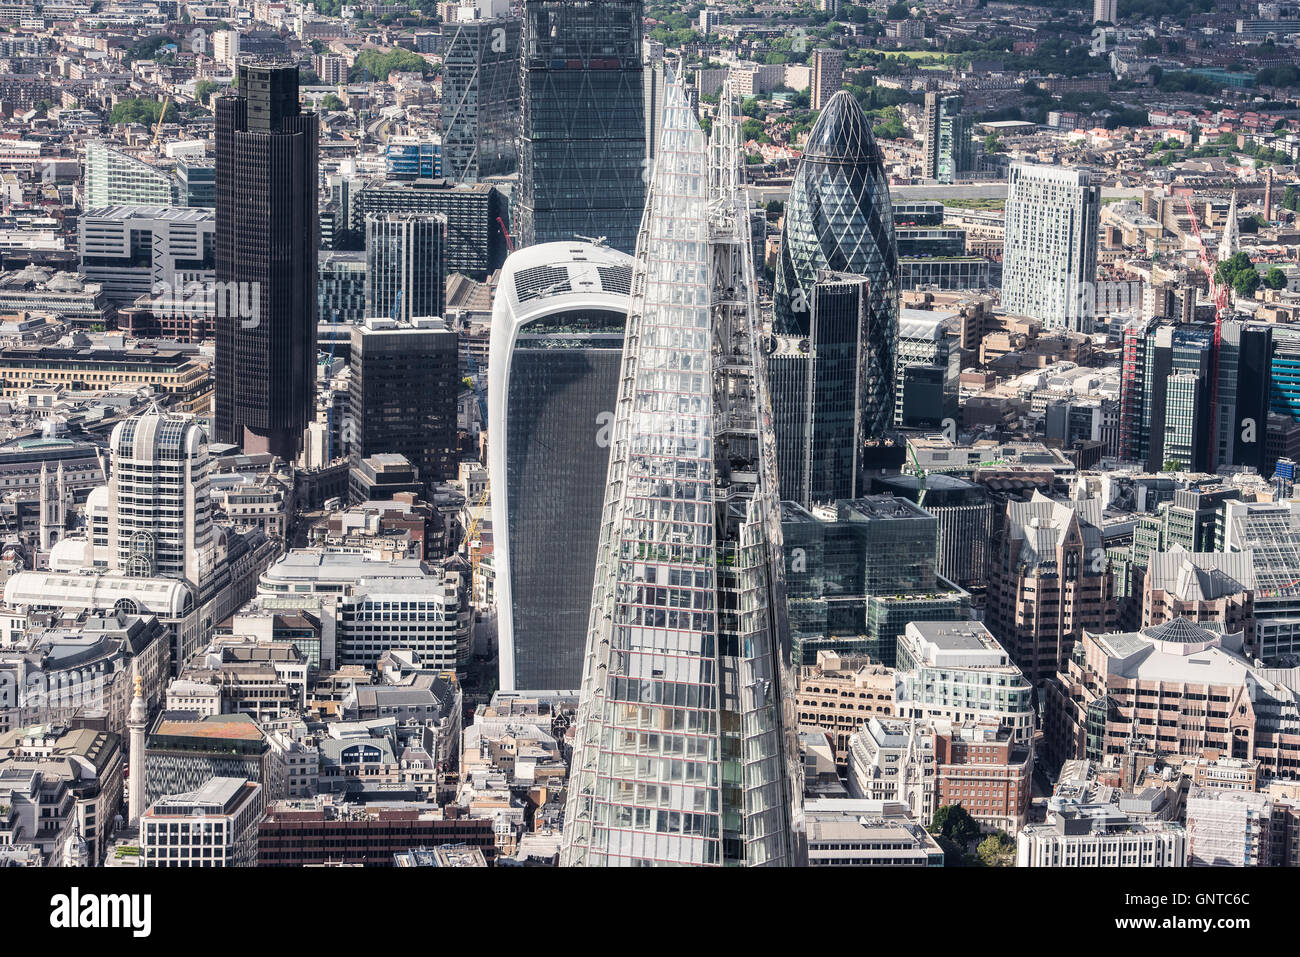 City of London view from helicopter, Shard and Gherkin in sight Stock Photo